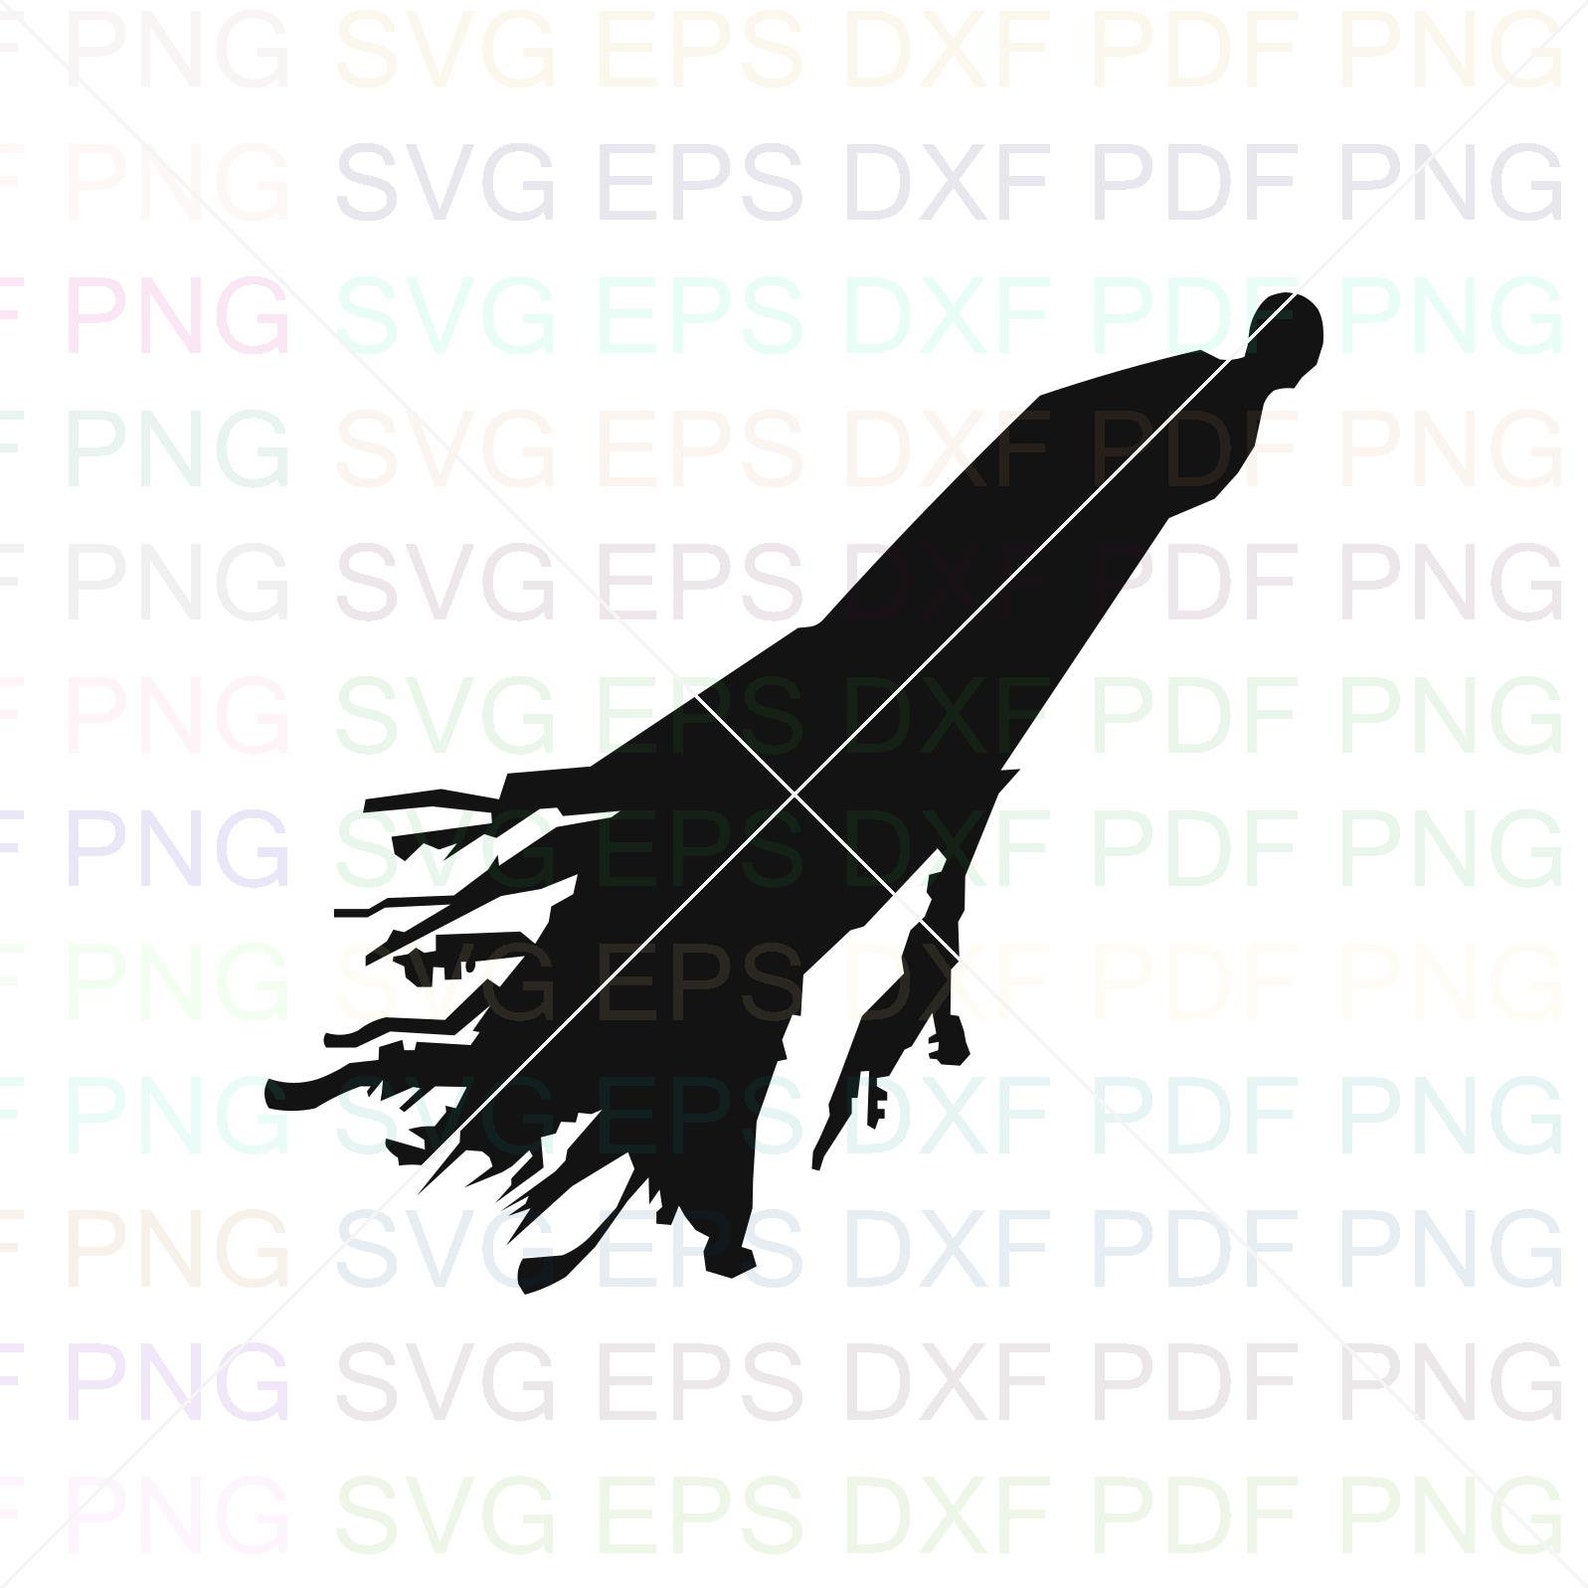 Dementor Svg Dxf Eps Pdf Png Cricut Cutting file Vector | Etsy